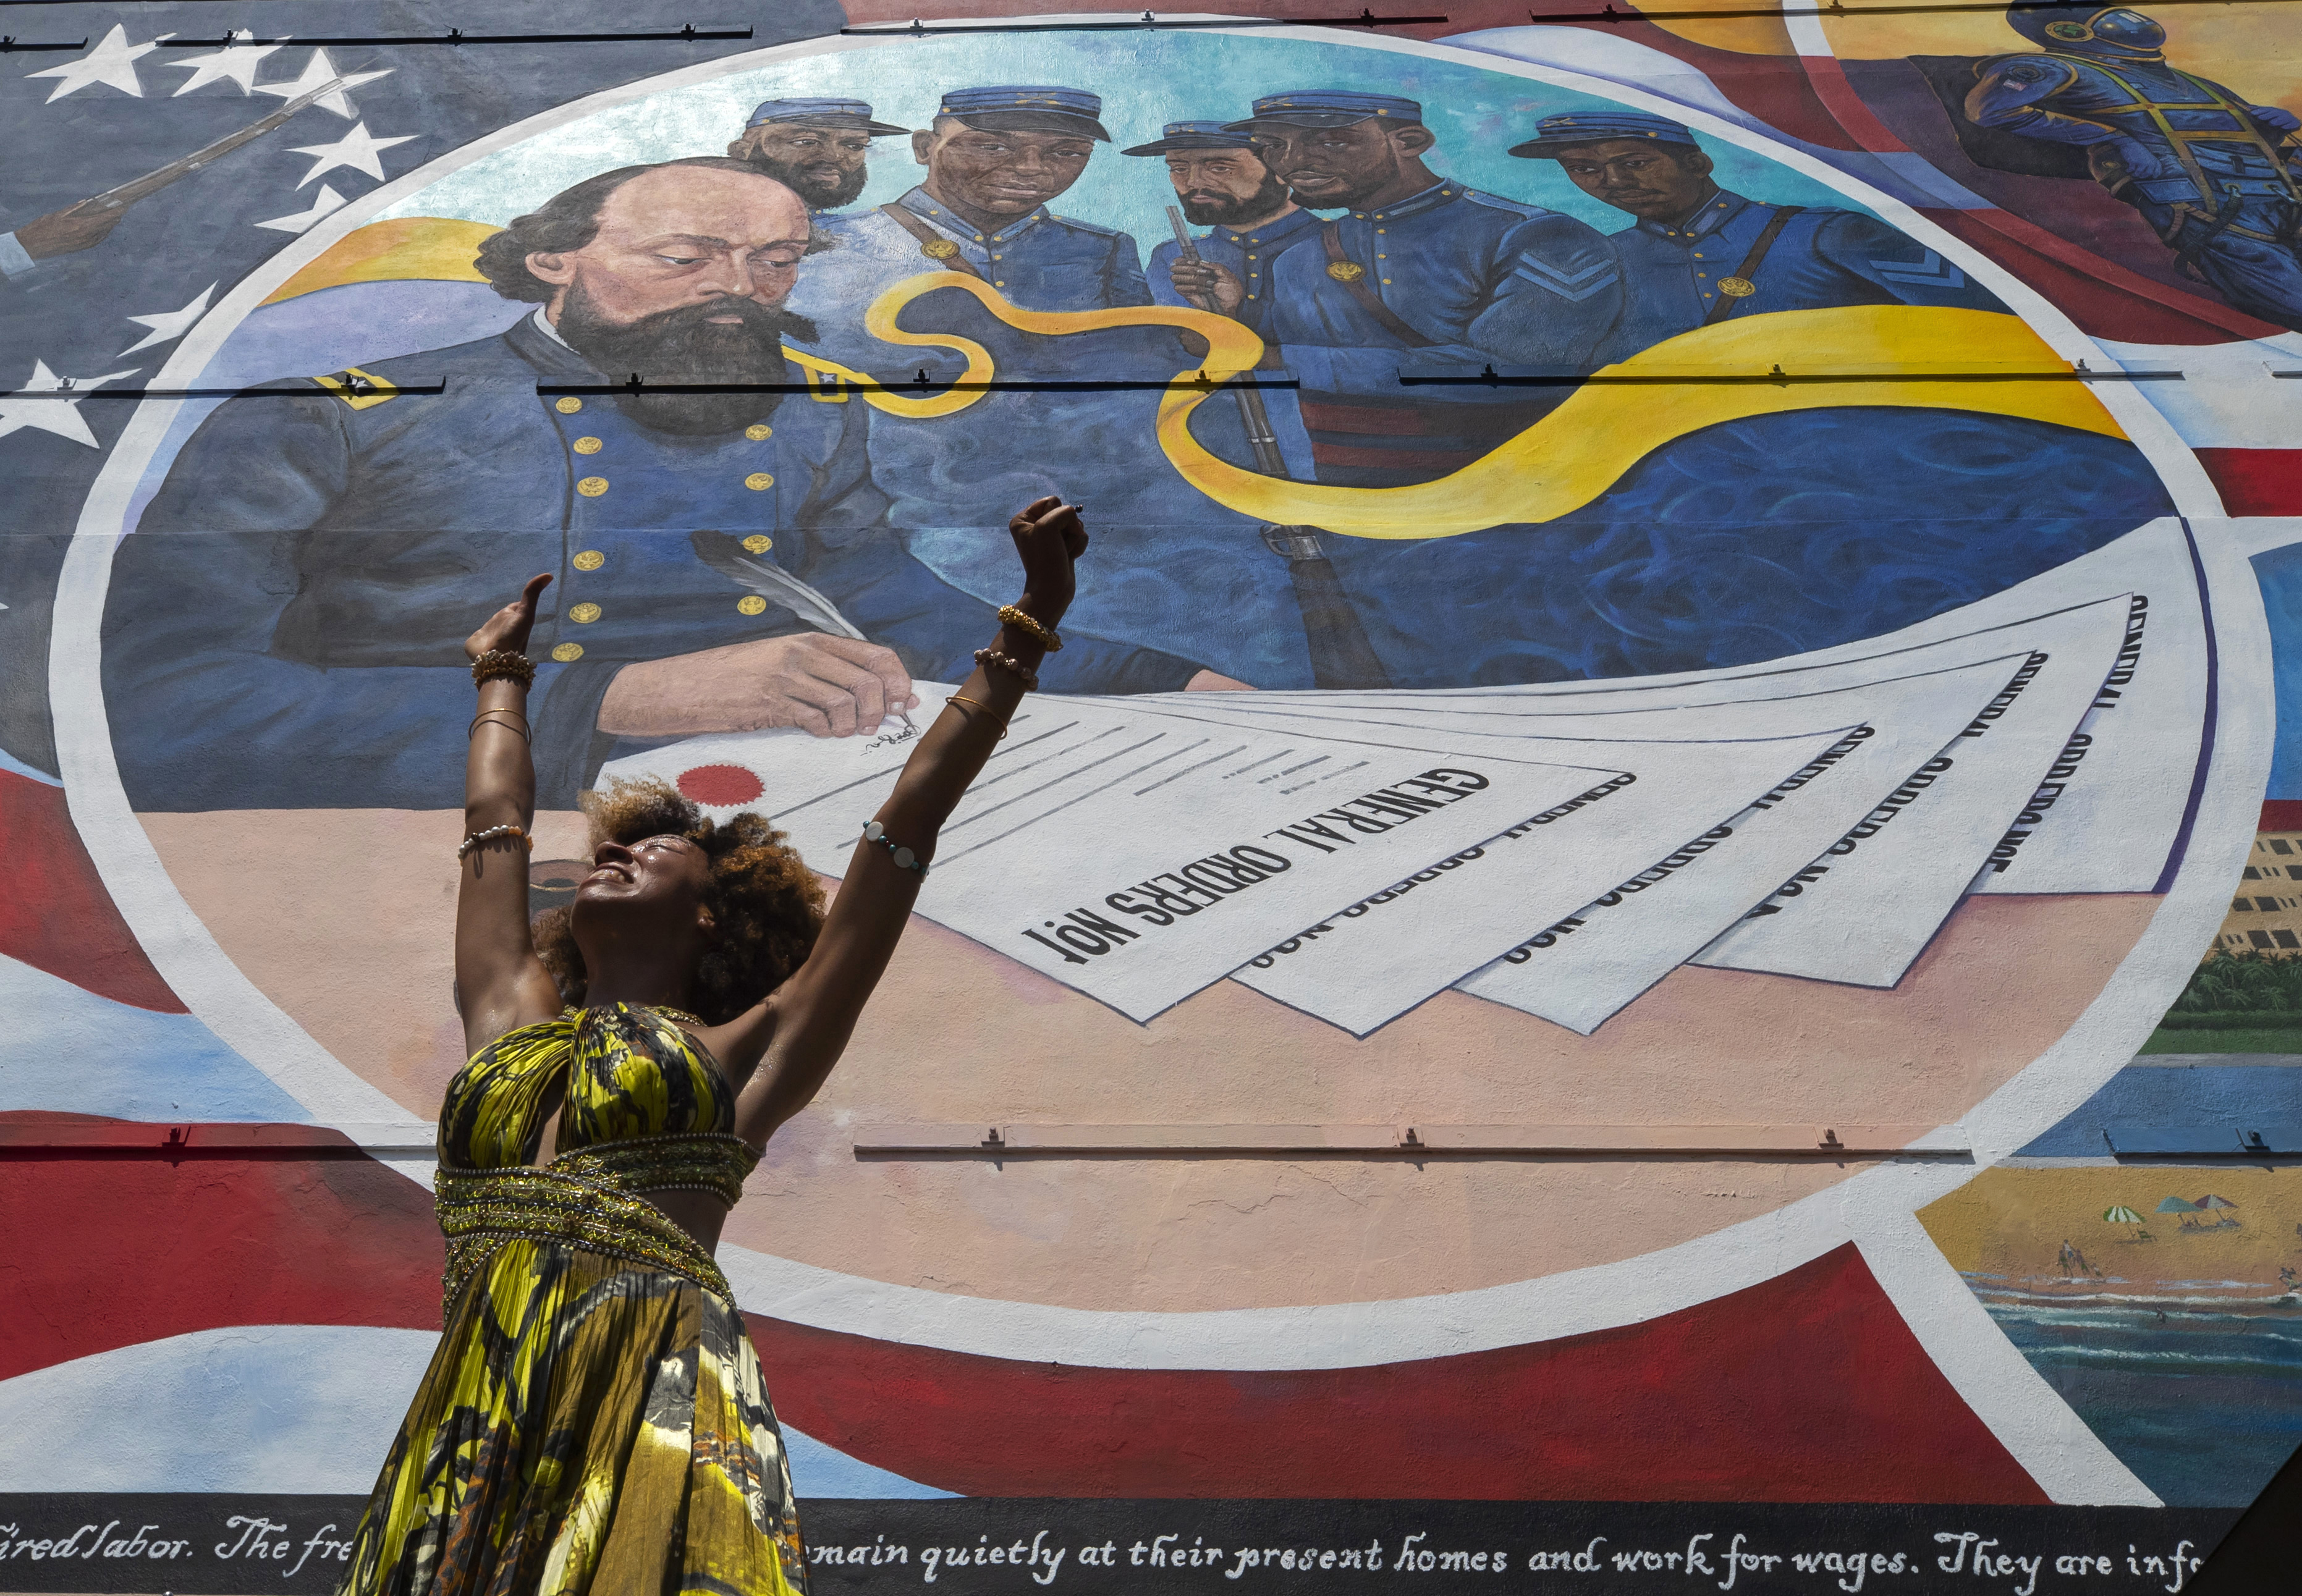 FILE - Dancer Prescylia Mae, of Houston, performs during a dedication ceremony for the massive mural "Absolute Equality" in downtown Galveston, Texas, on June 19, 2021. Communities all over the country will be marking Juneteenth, the day that enslaved Black Americans learned they were free. For generations, the end of one of the darkest chapters in U.S. history has been recognized with joy in the form of parades, street festivals, musical performances or cookouts. Yet, the U.S. government was slow to embrace the occasion. (Stuart Villanueva/The Galveston County Daily News via AP, File)